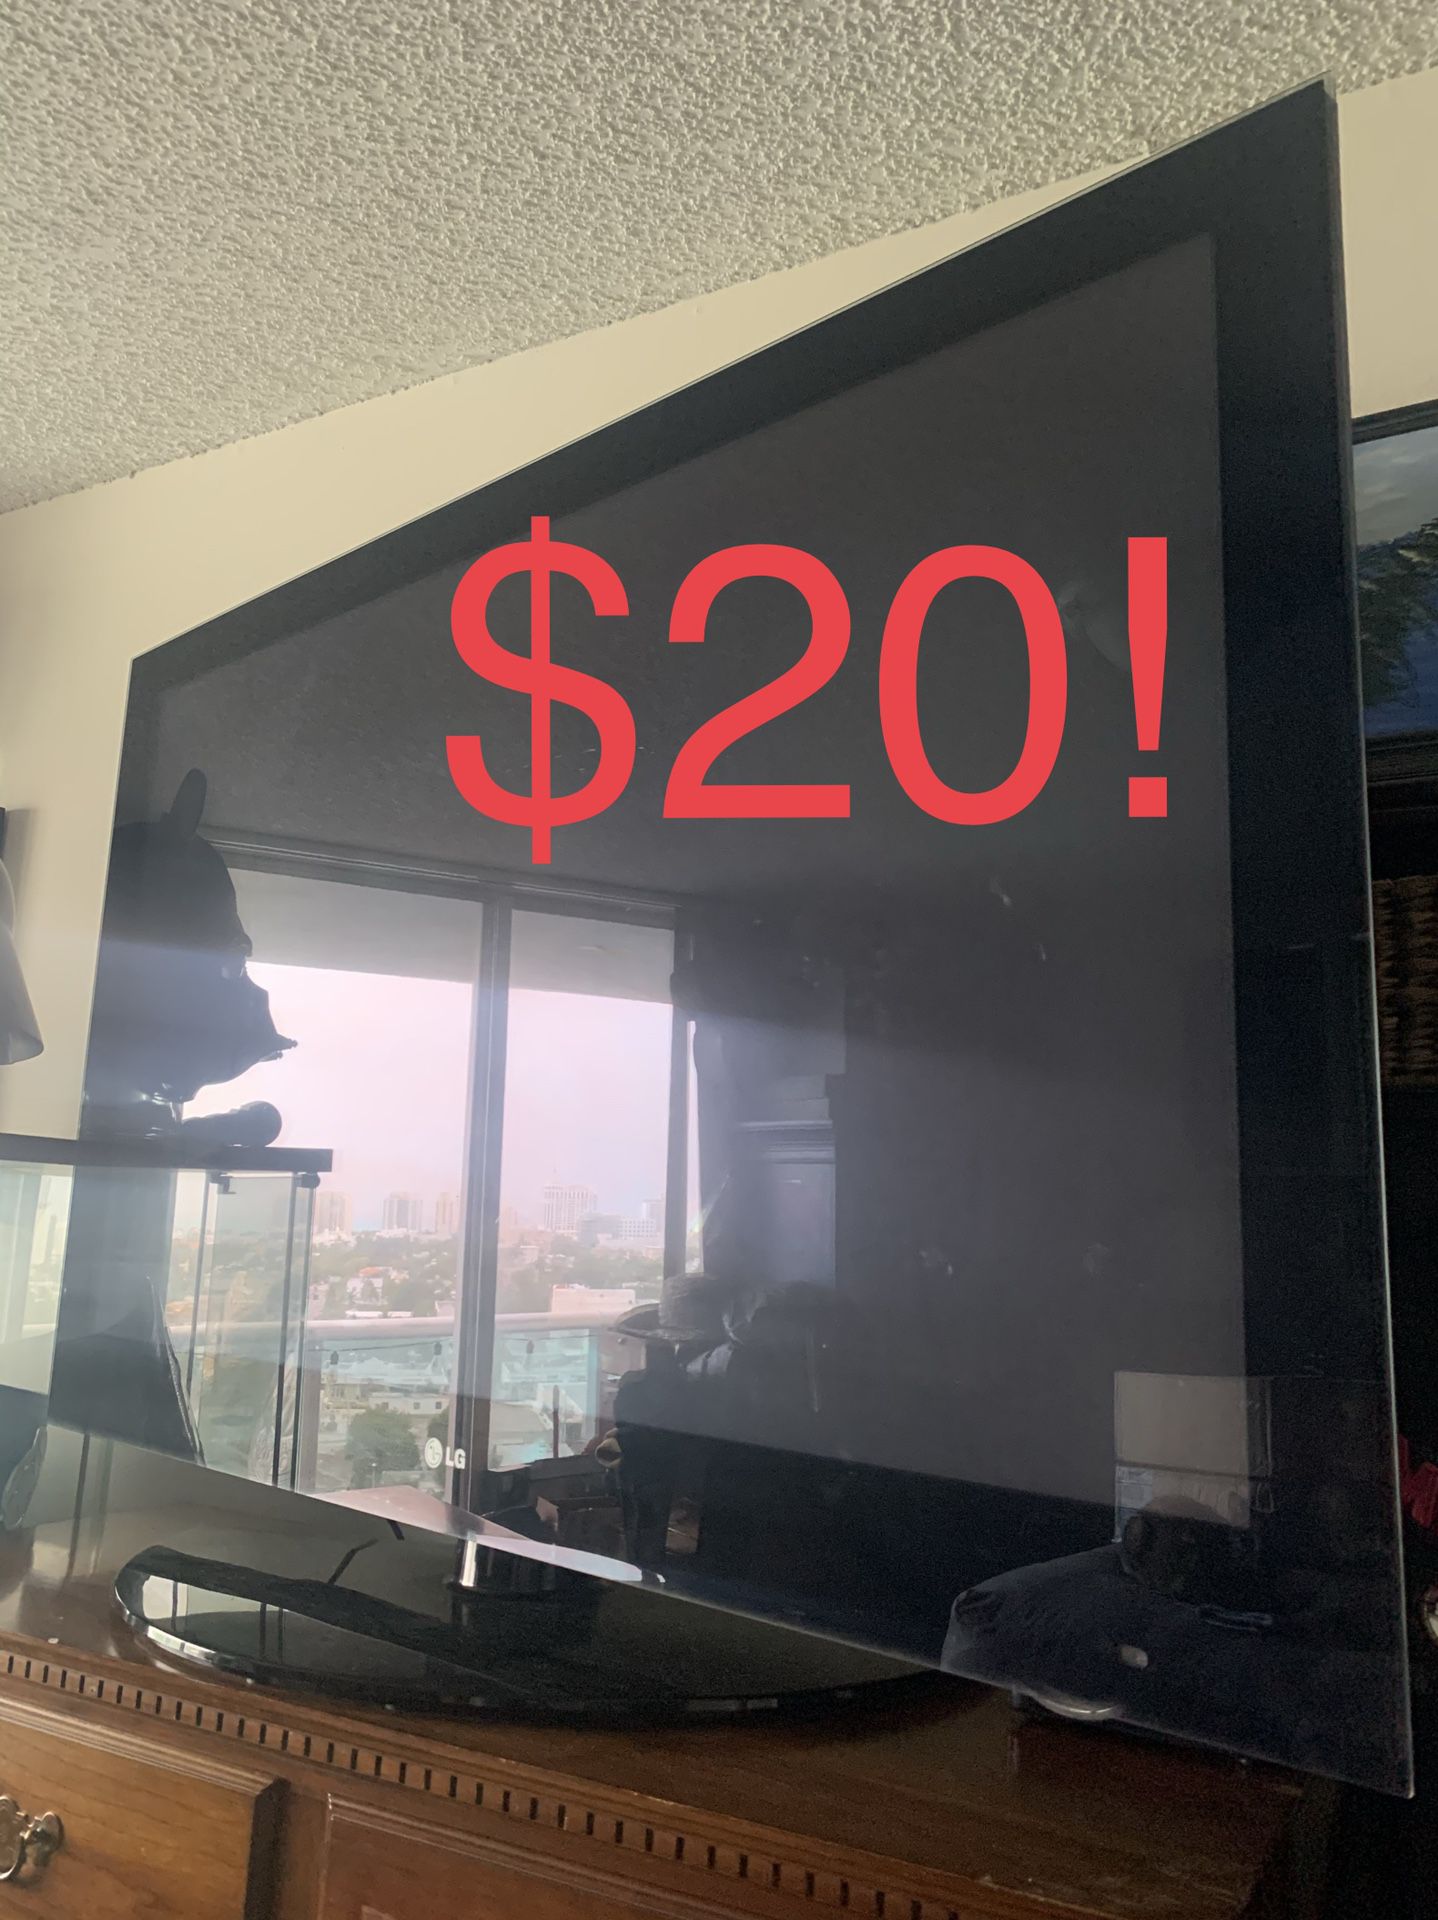 50” LG TV.. now $20